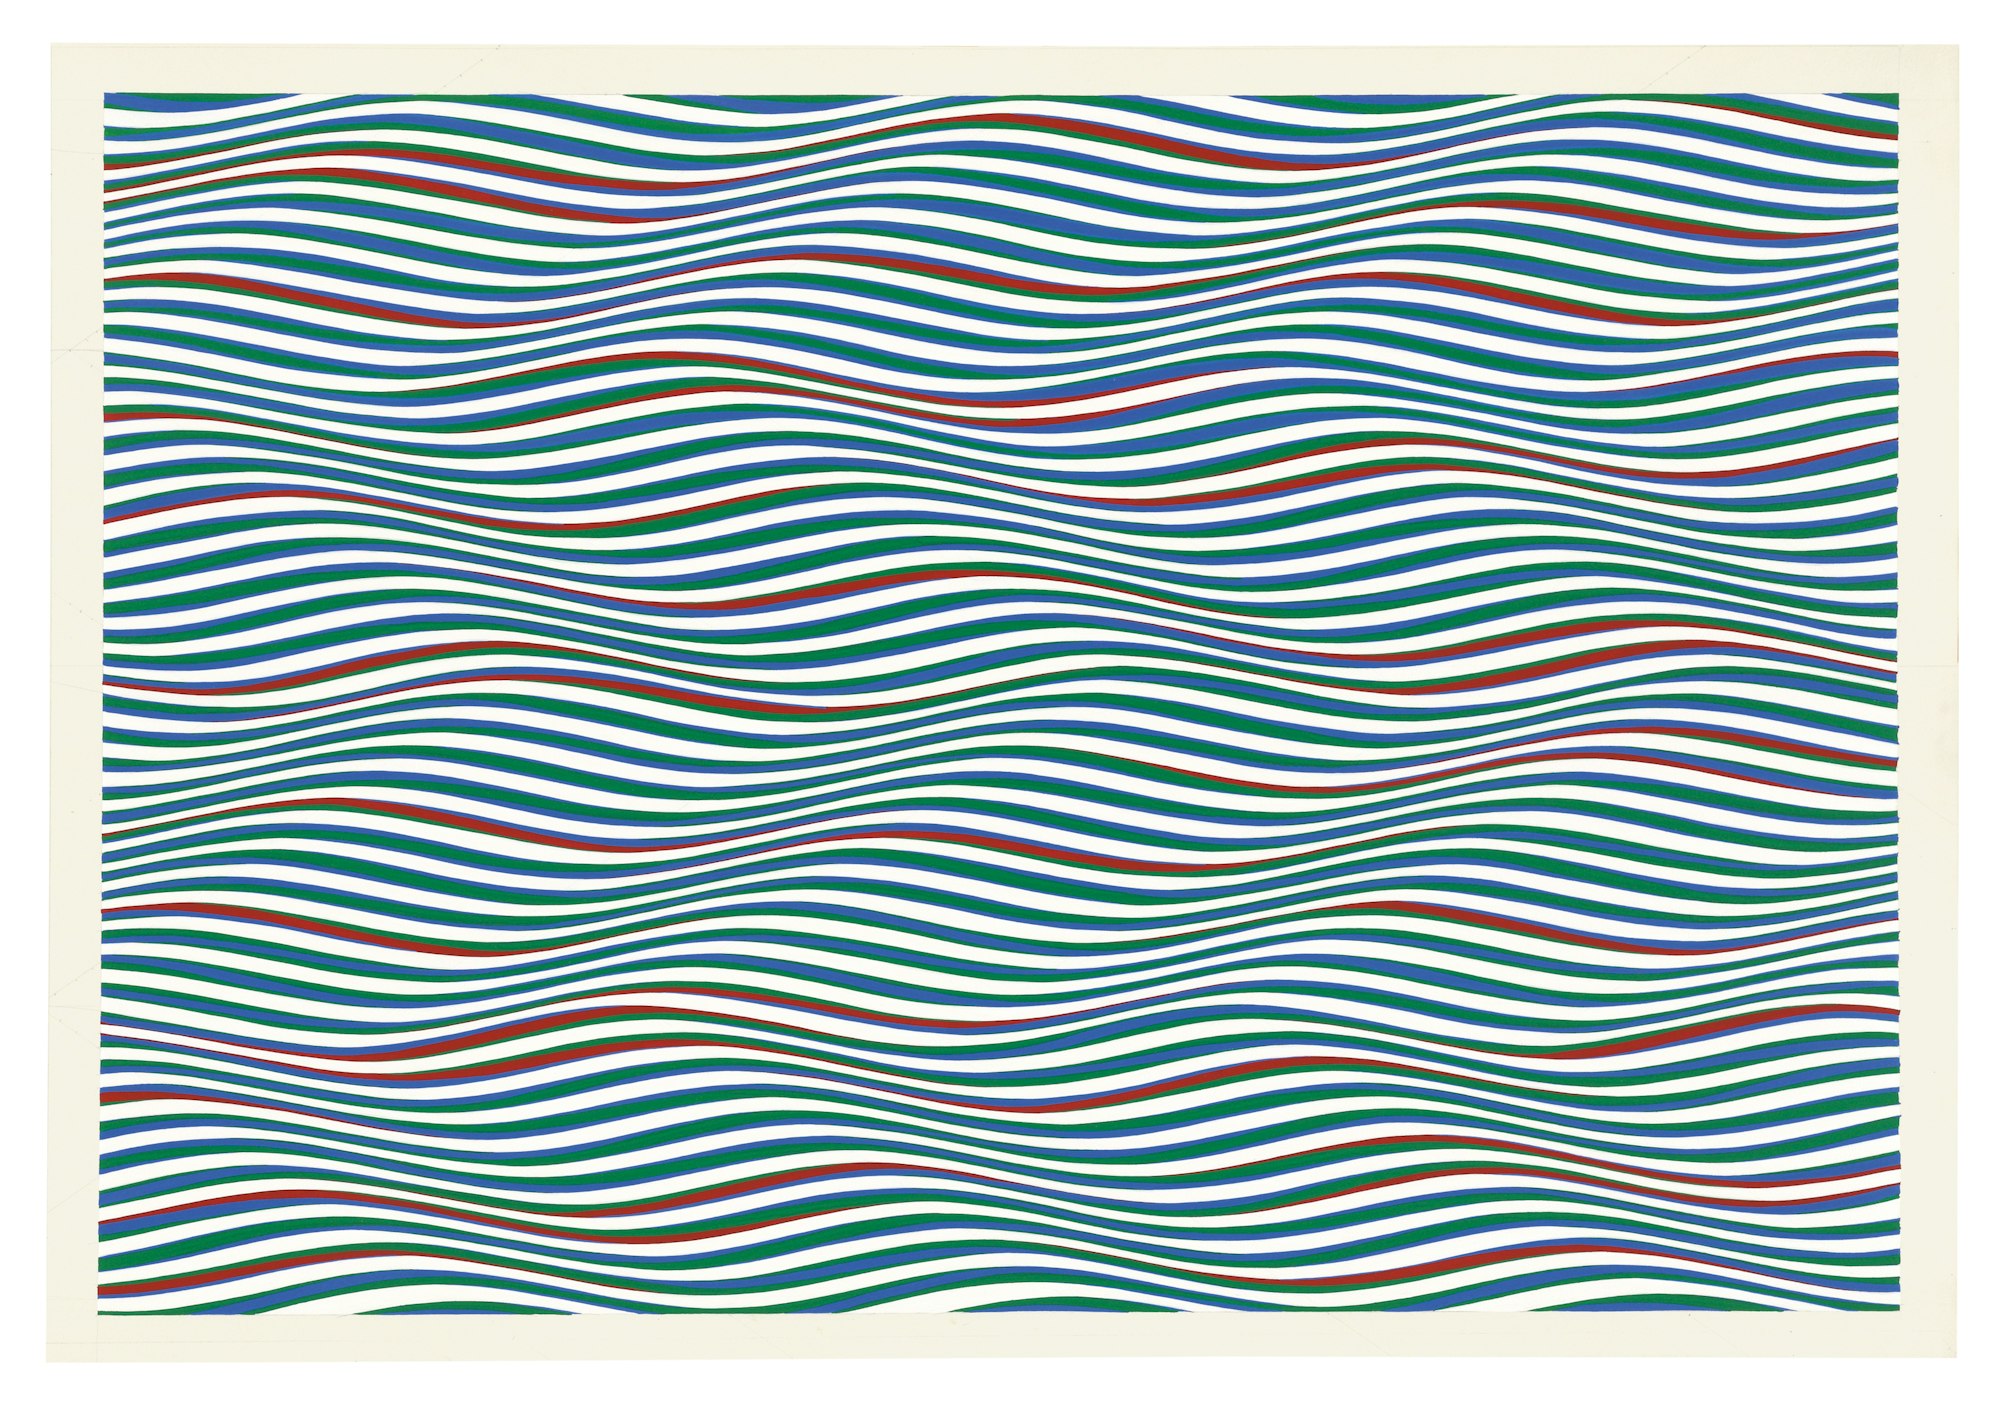 Bridget Riley Drawings From the Artist's Studio The Art Institute of